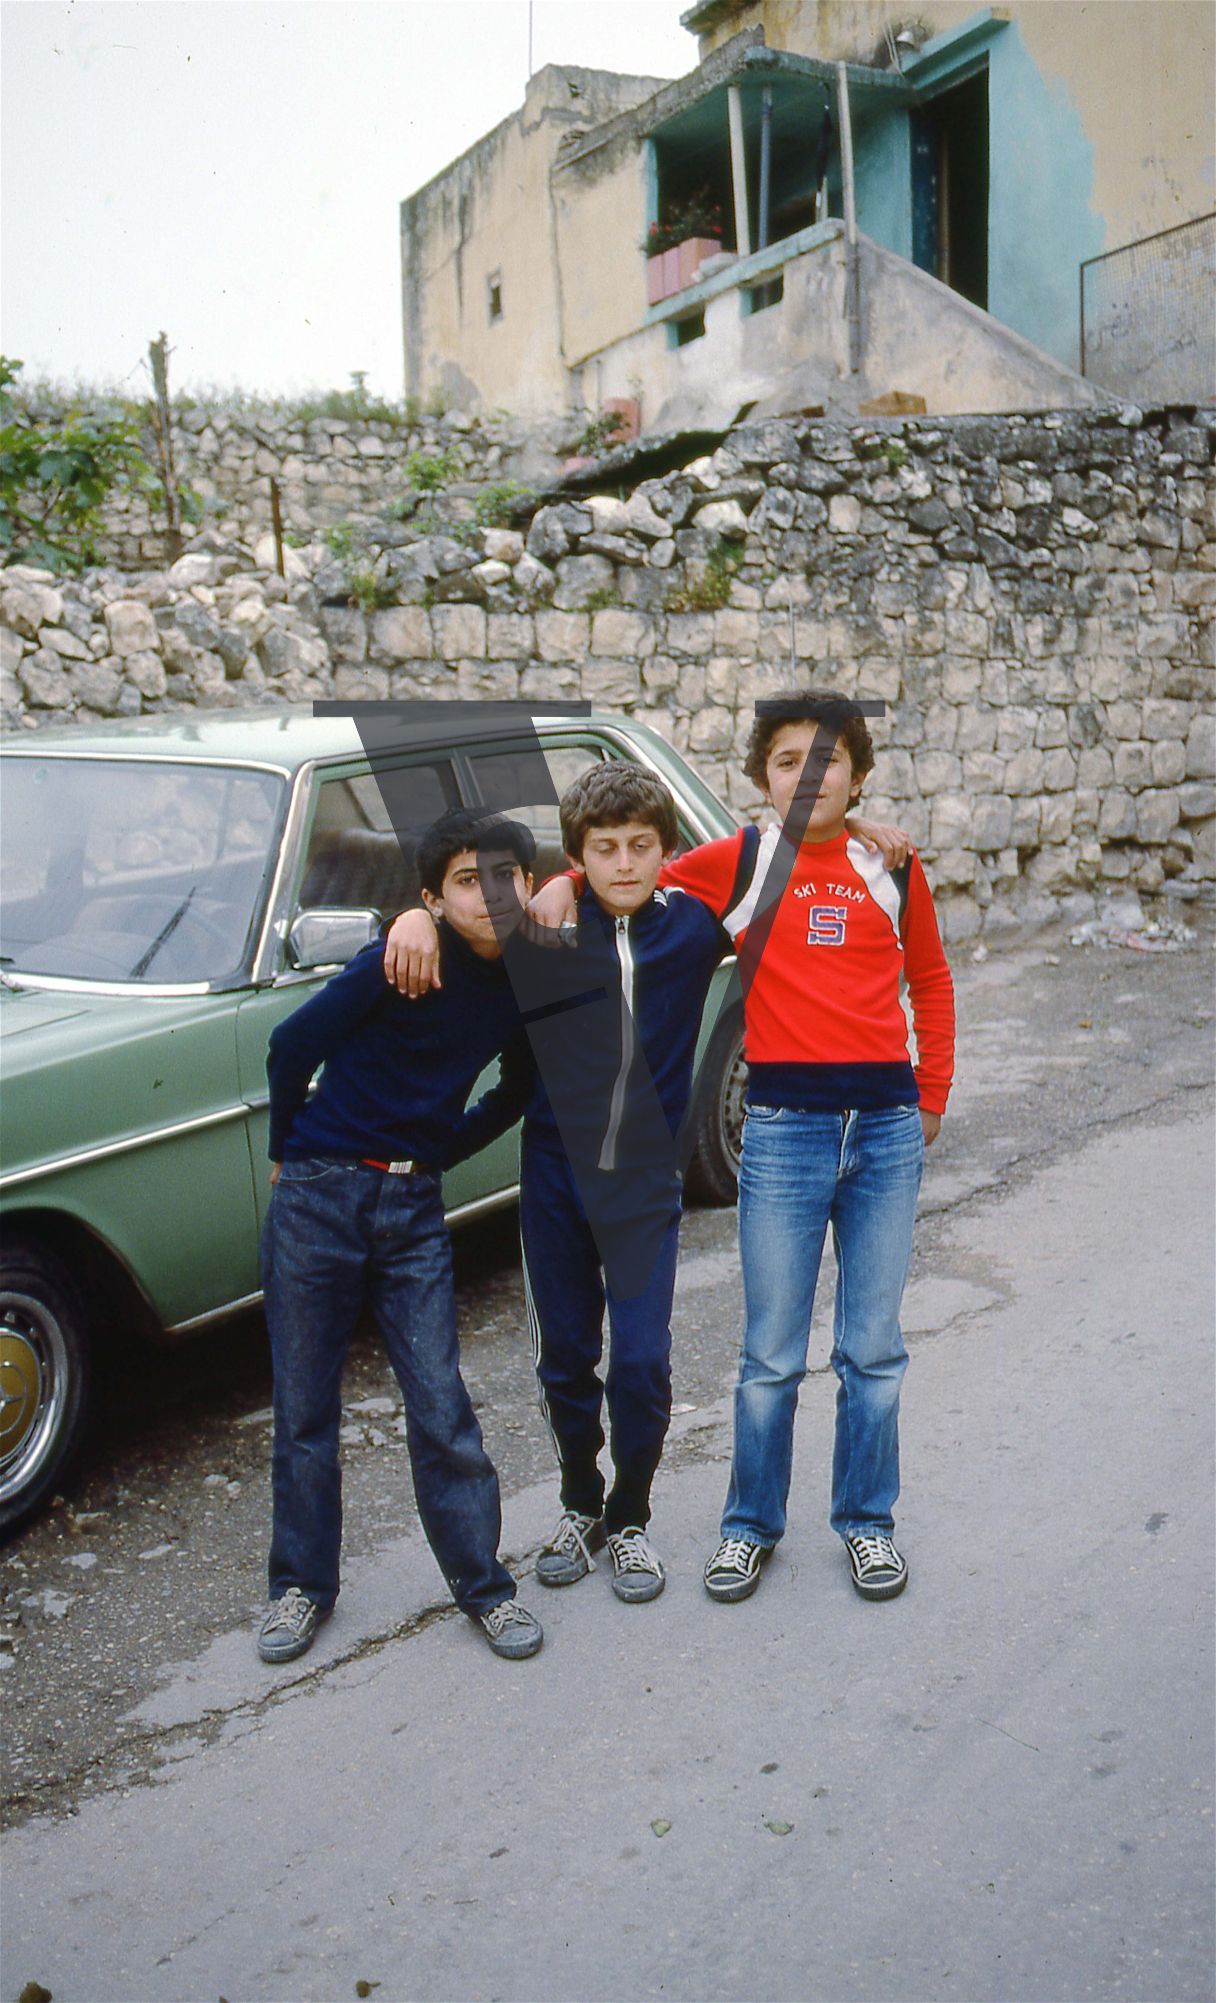 Lebanon, South of Beirut, three young boys pose in front of green car, portrait.